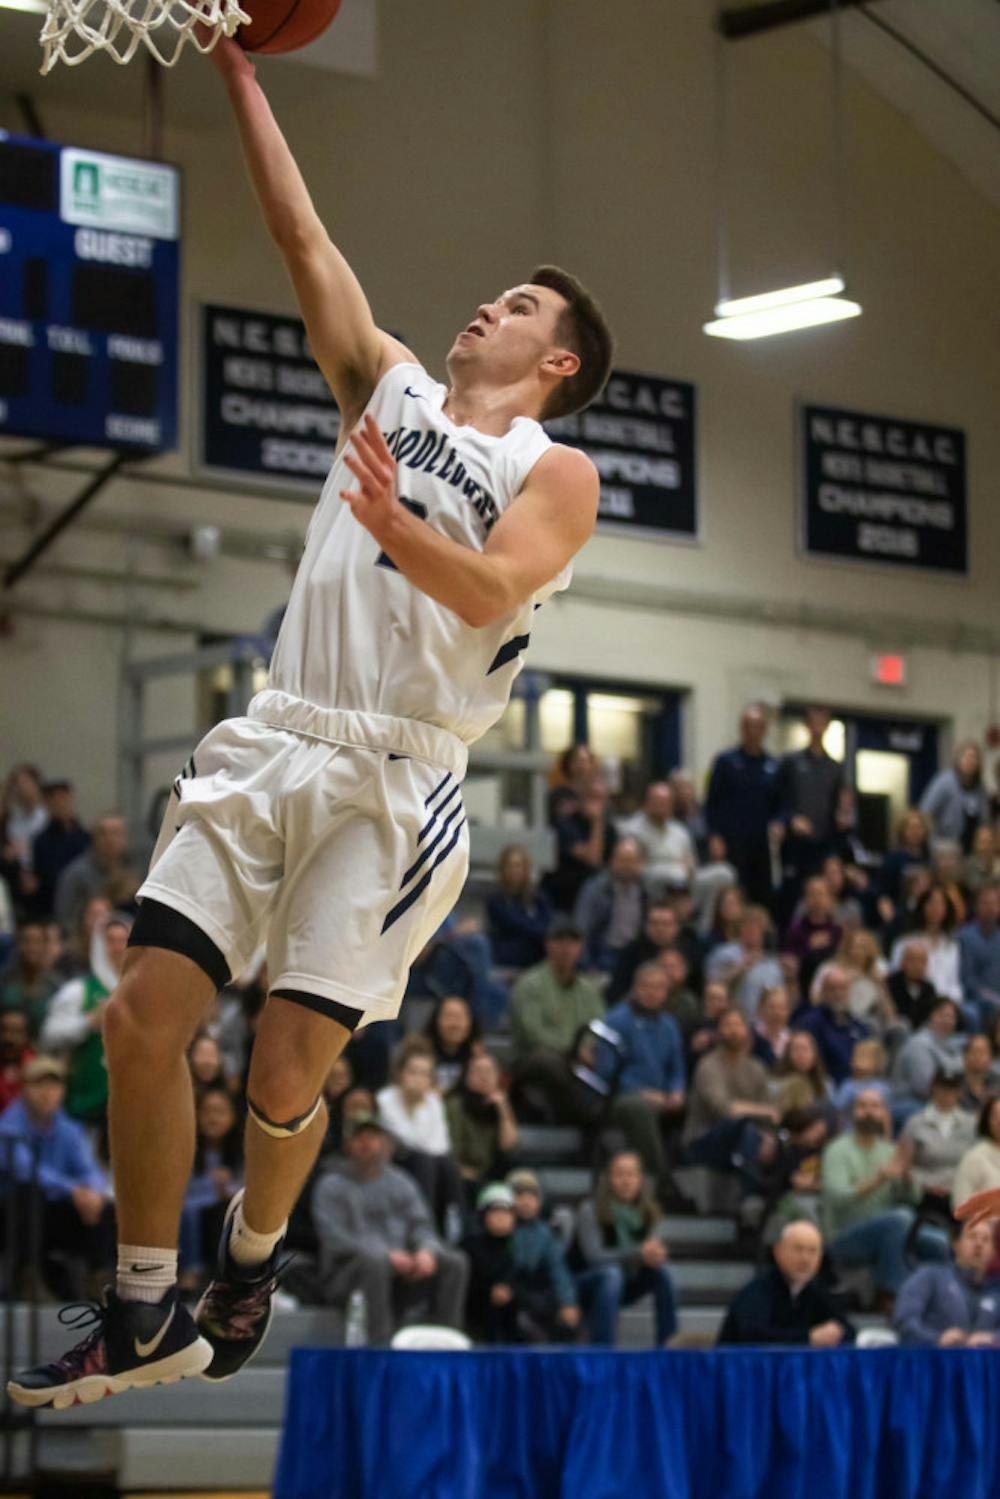 <span class="photocreditinline"><a href="https://middleburycampus.com/39670/uncategorized/michael-borenstein/">MICHAEL BORENSTEIN</a></span><br />Griffin Kornaker ’21 finishes a layup in a game against Tufts.